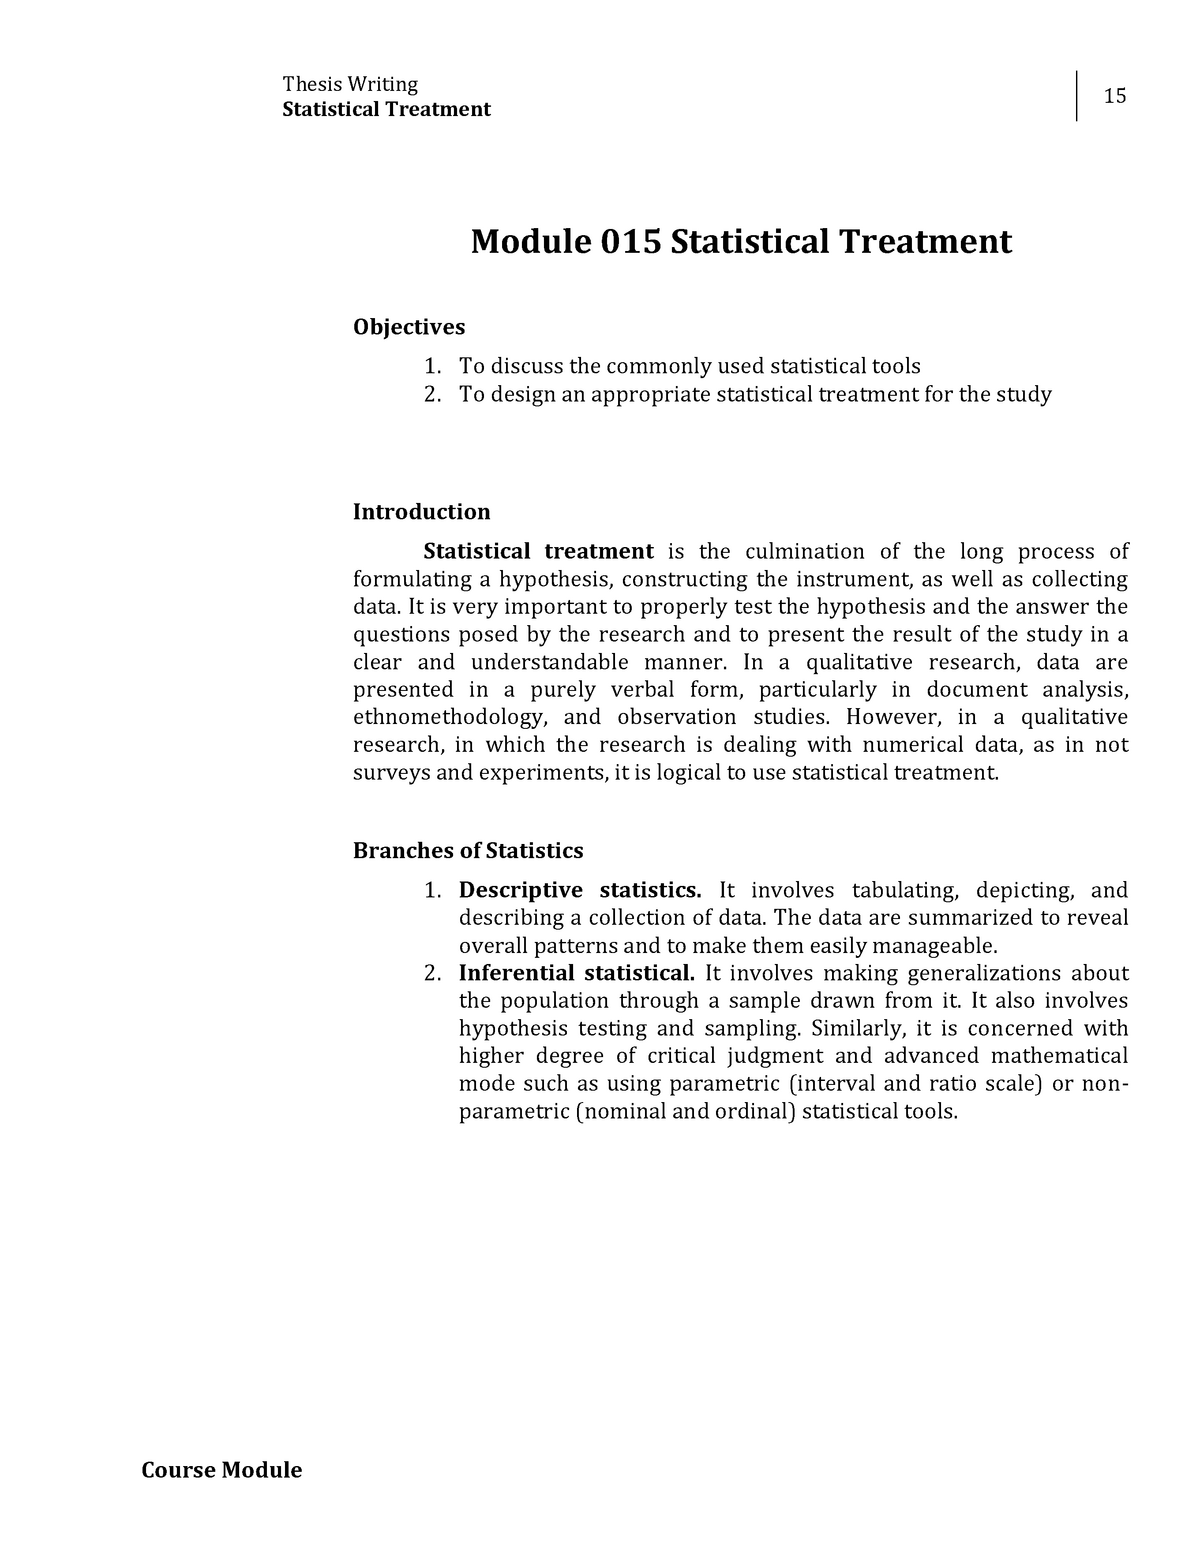 statistical treatment analysis in research example